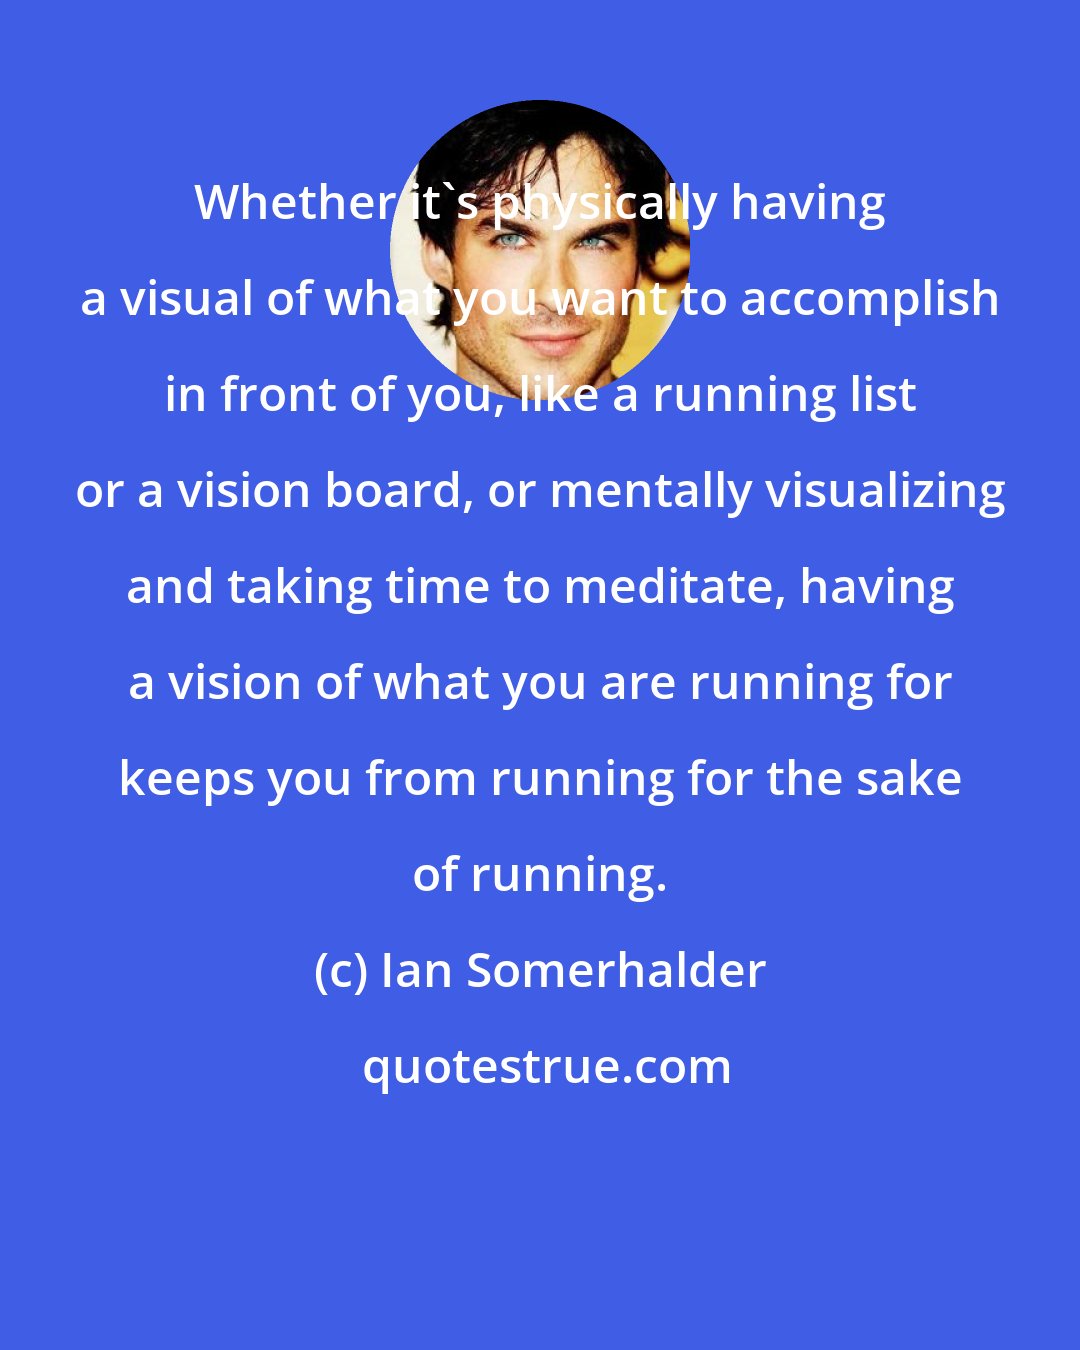 Ian Somerhalder: Whether it's physically having a visual of what you want to accomplish in front of you, like a running list or a vision board, or mentally visualizing and taking time to meditate, having a vision of what you are running for keeps you from running for the sake of running.